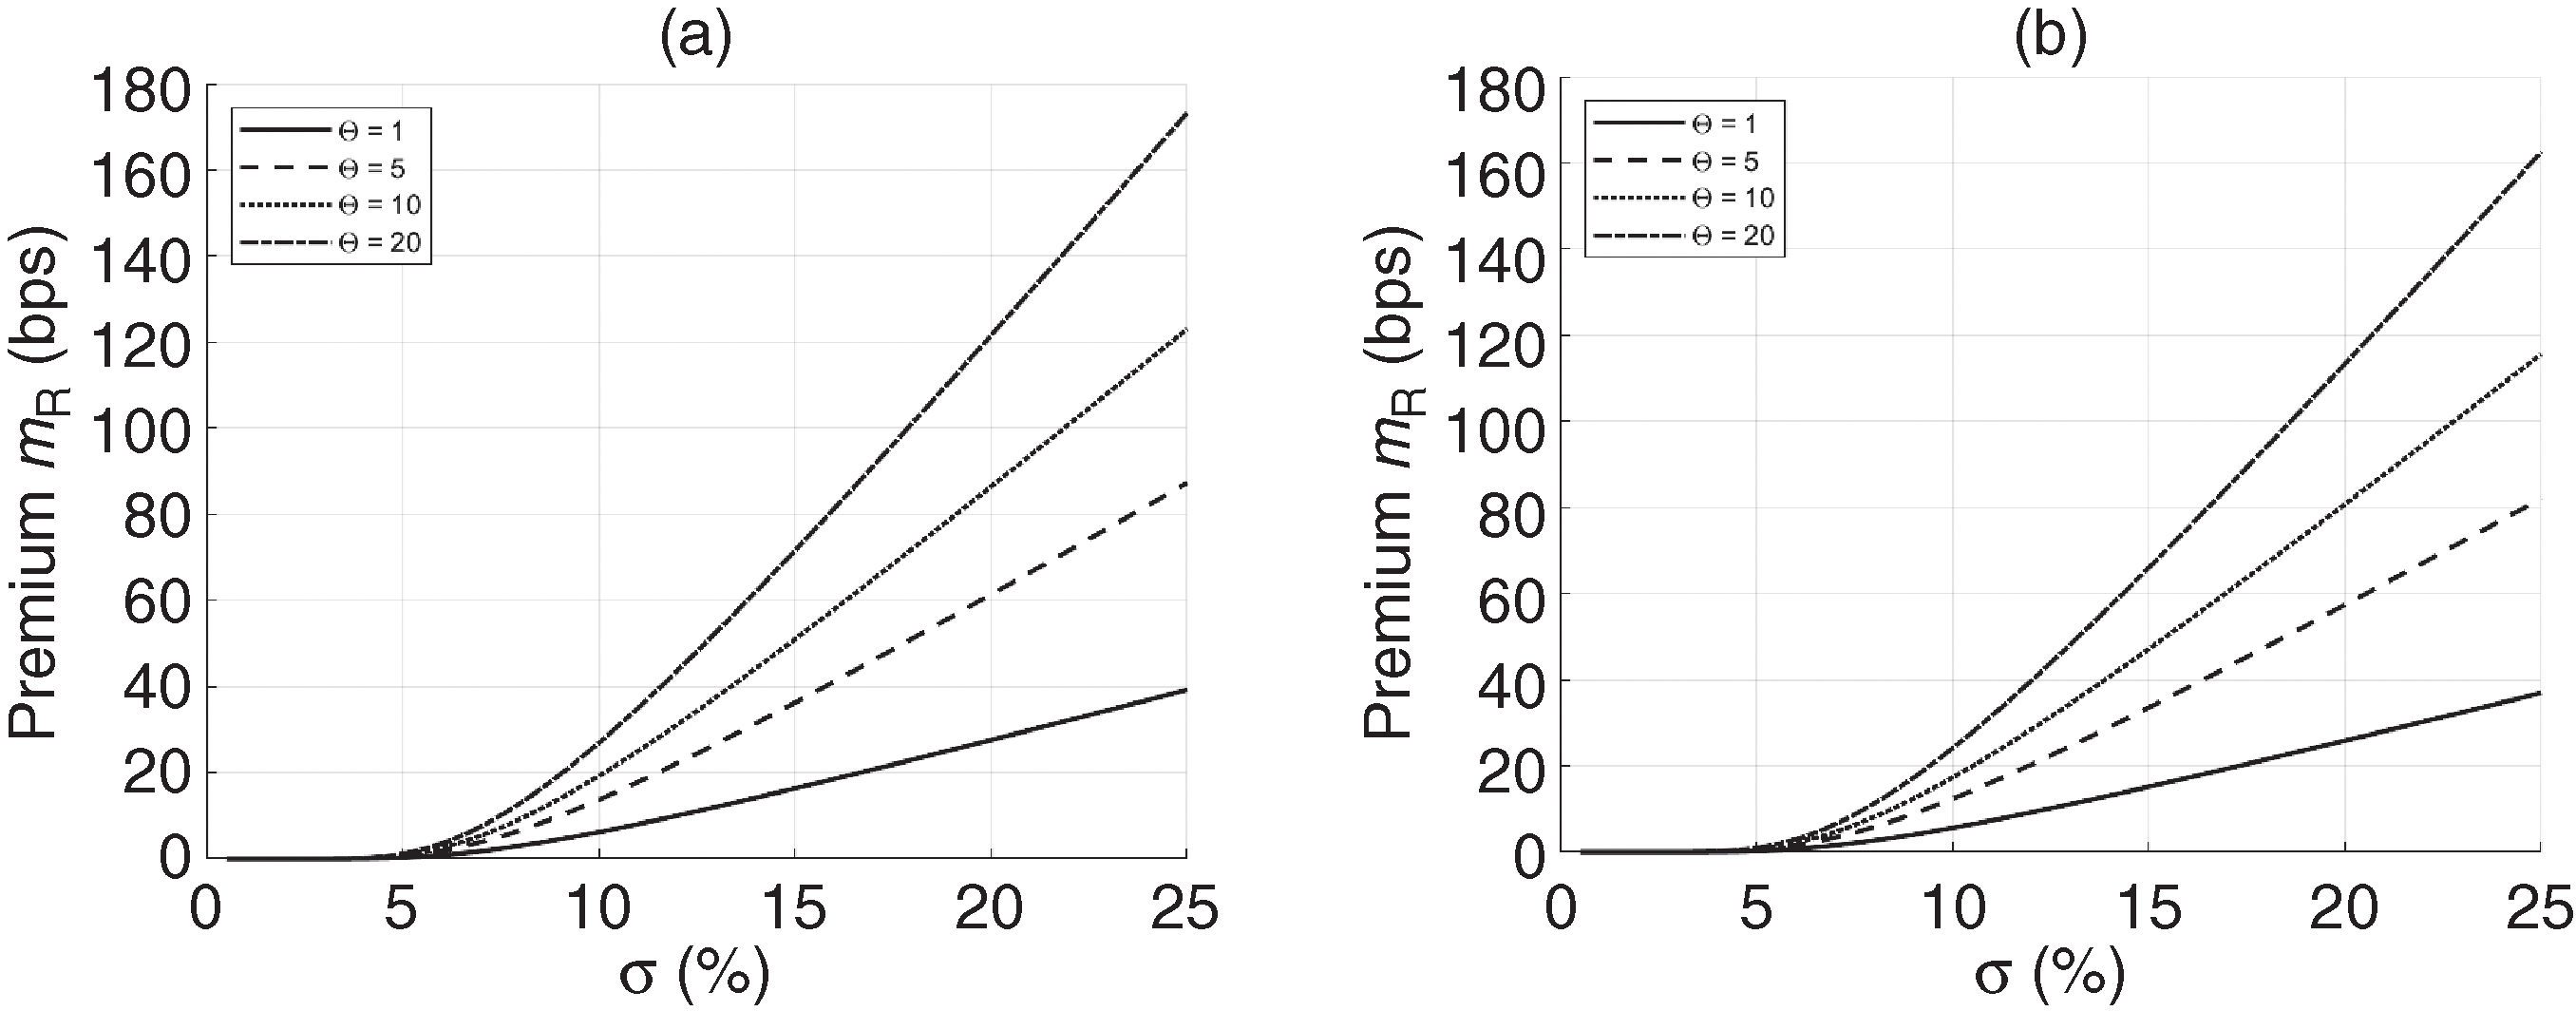 Analytical premium m-sub-R as a function of volatility. The value of the premium under the (a) risk-neutral valuation and (b) discounted expected payoff valuation using empirical values as a function of the volatility sigma for fixed levels of the liquidity measures varTheta (in days). Parameter values are T=1 (investment horizon), X-sub-0=1 (initial investment), c-sub-M=0.1 (managerial deposit), ...=0.0126 (empirical mean log return) and r=0.01 (risk-free rate).